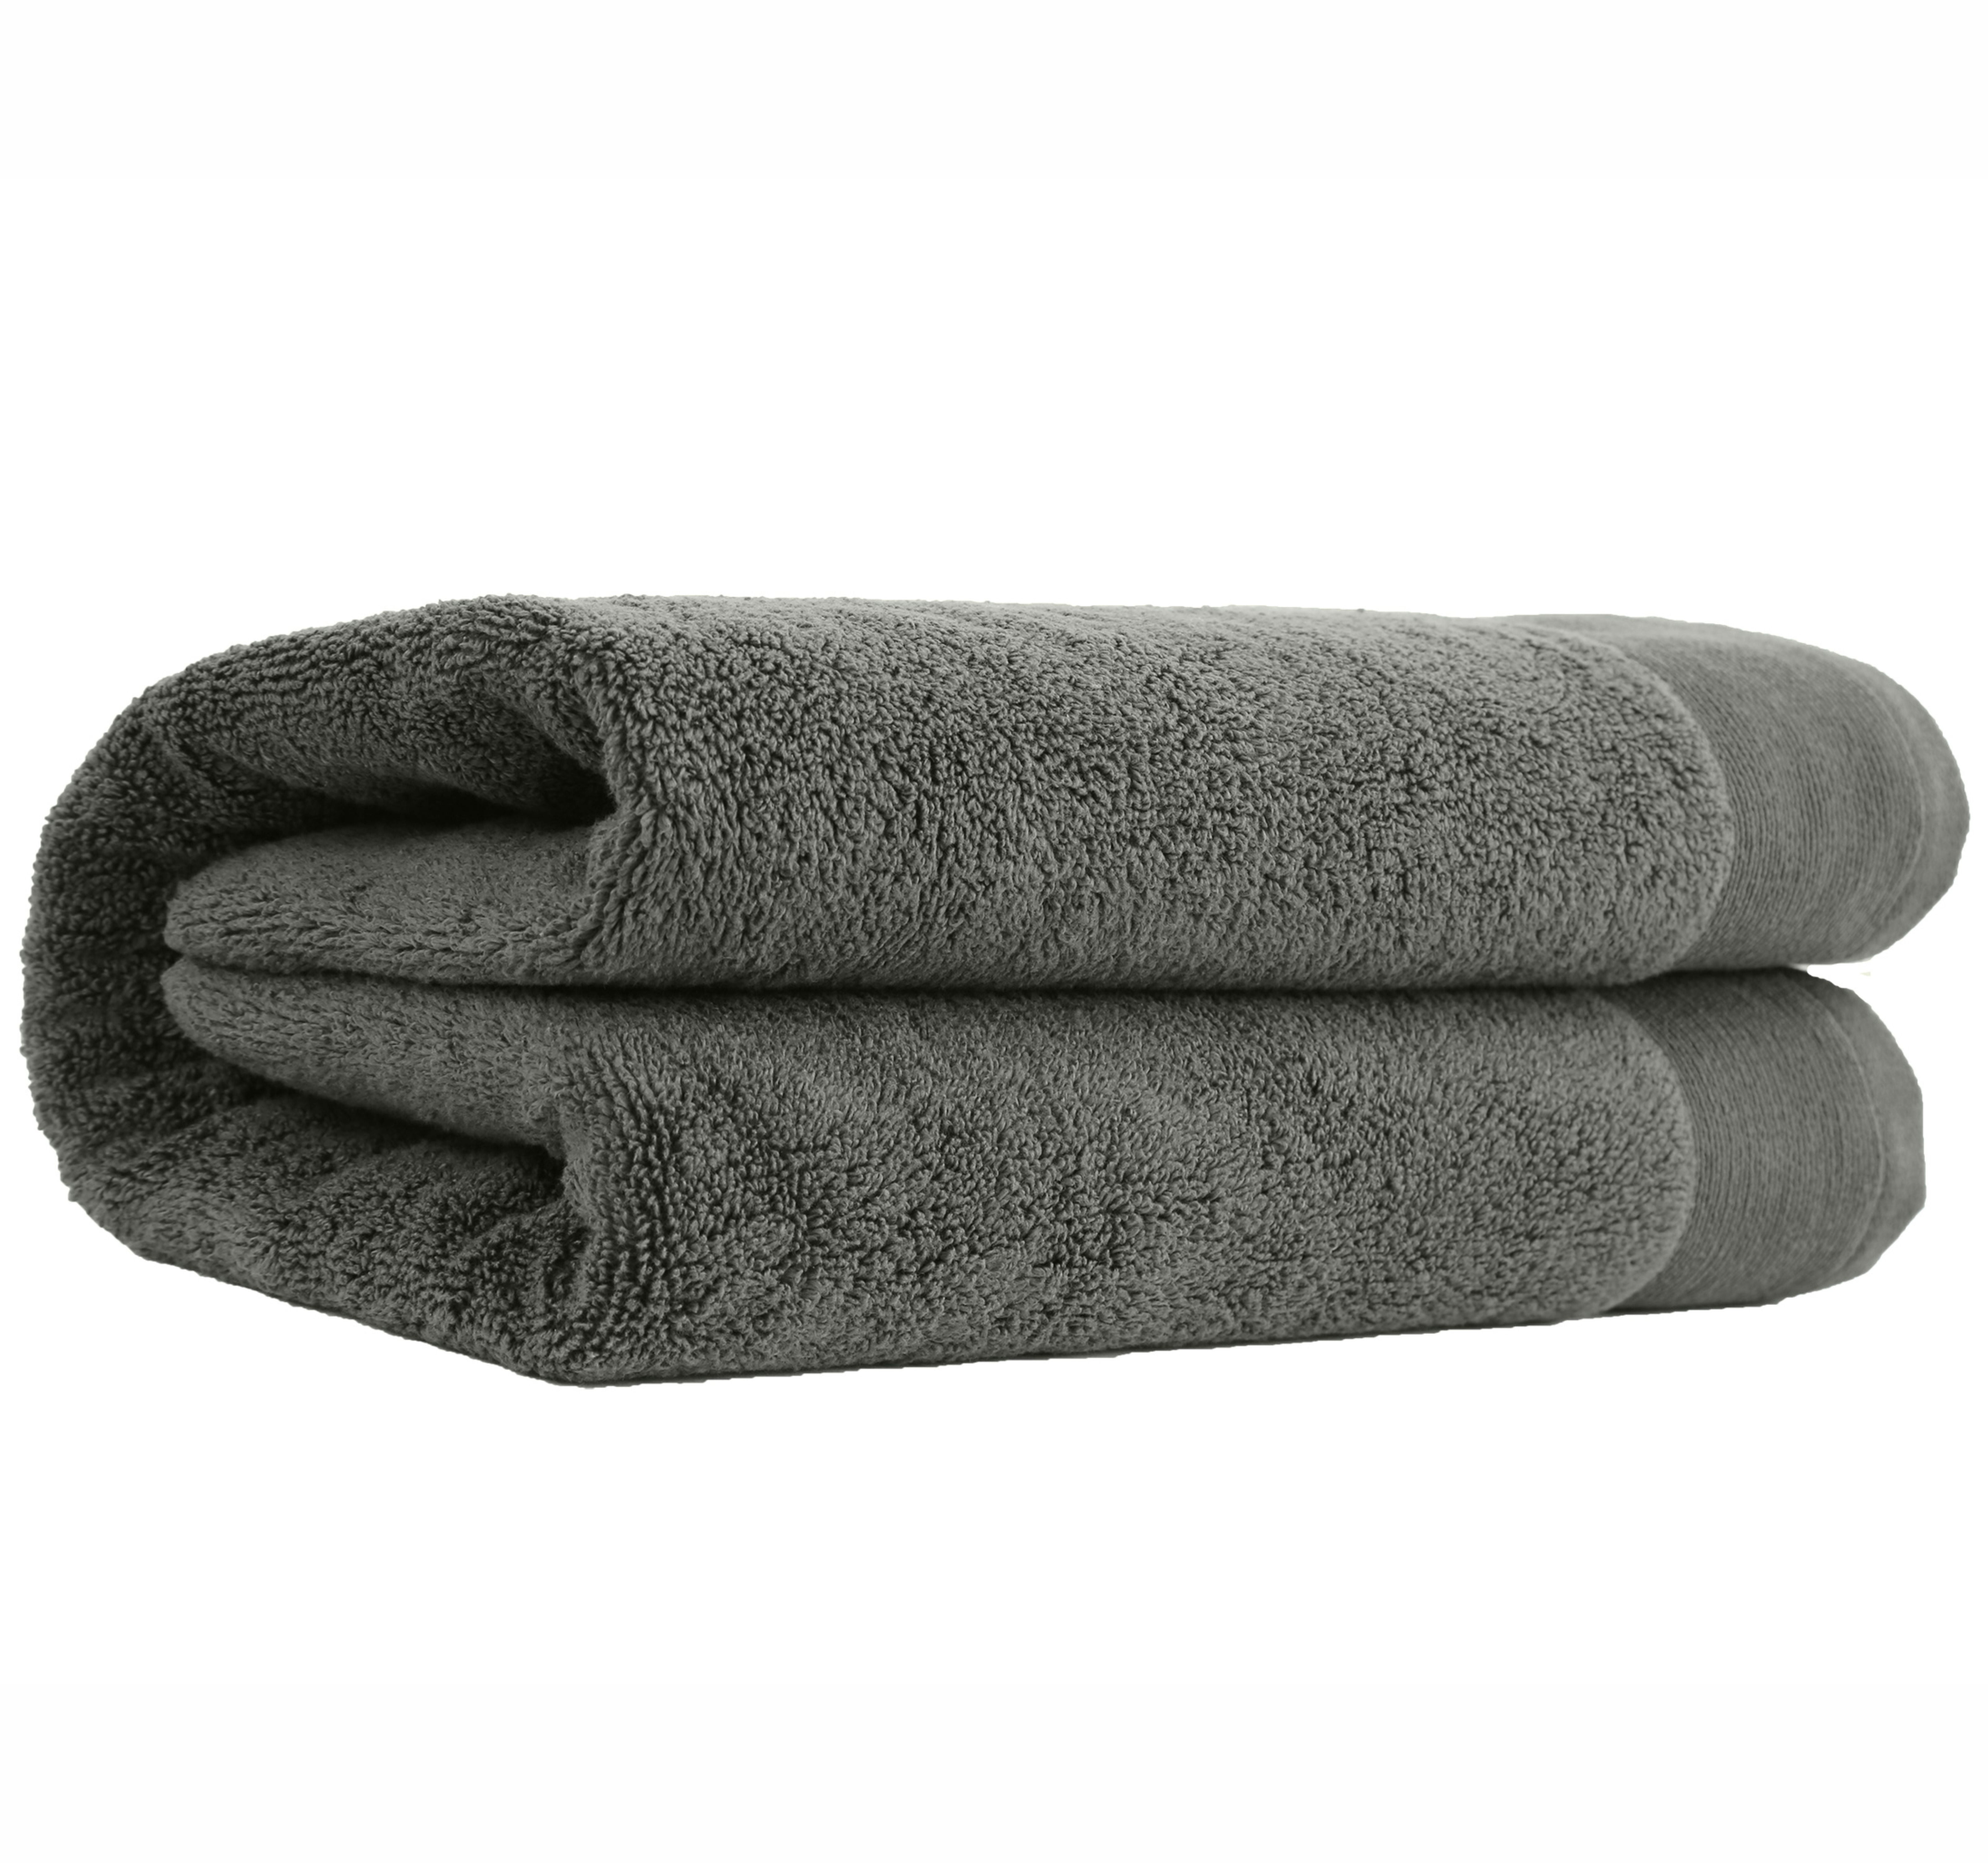 Luxury 100% Cotton Bath Sheets - Extra Large Size, Very Soft & Fluffy,  Quick Dry & Highly Absorbent, 2 Piece Hotel Quality Bathroom Towel, Ideal  for Tall/Big Body Types, Ivory - 33